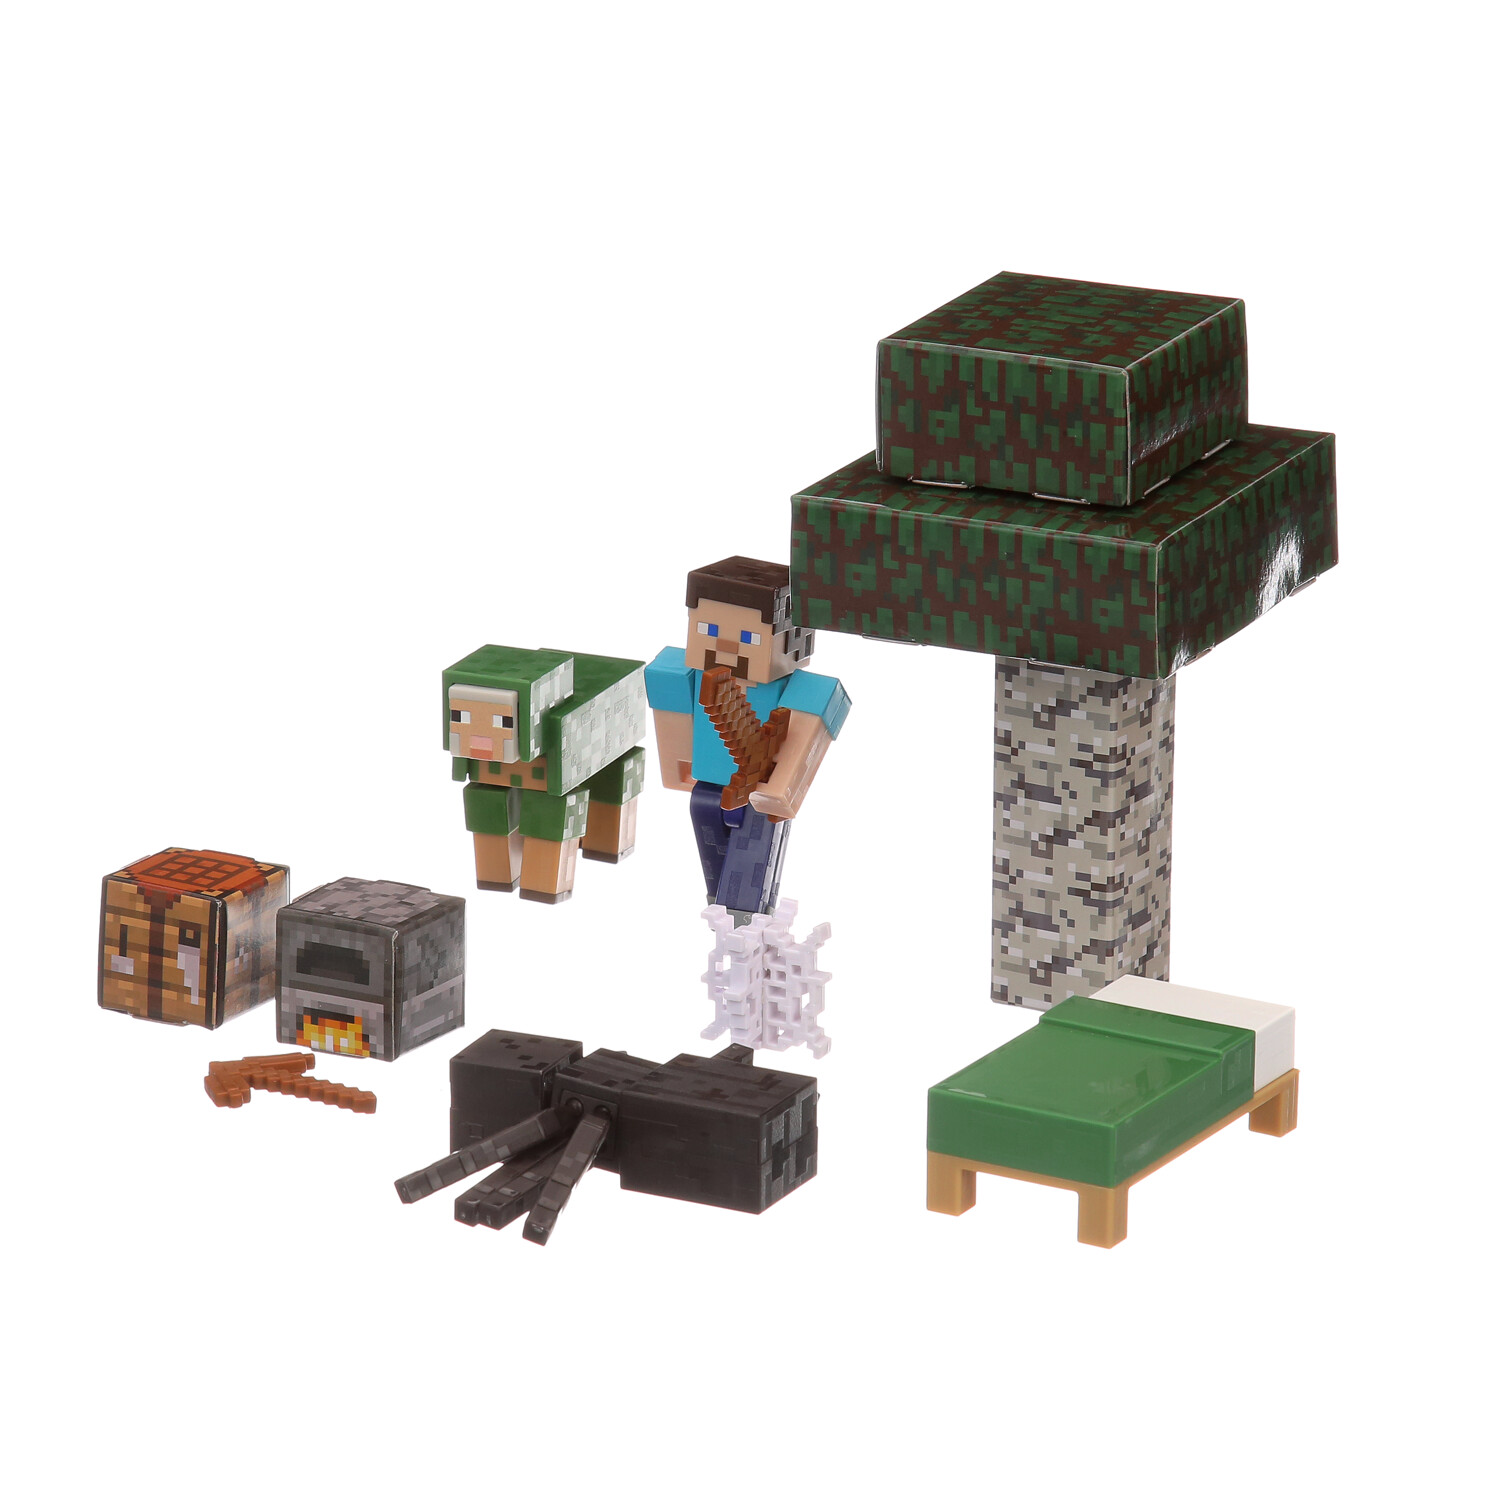  Mattel Minecraft Overworld Noob Adventure Pack Figures  Accessories and Papercraft Blocks, Complete Play in a Box, Toy for Kids  Ages 6 Years and Older : Toys & Games